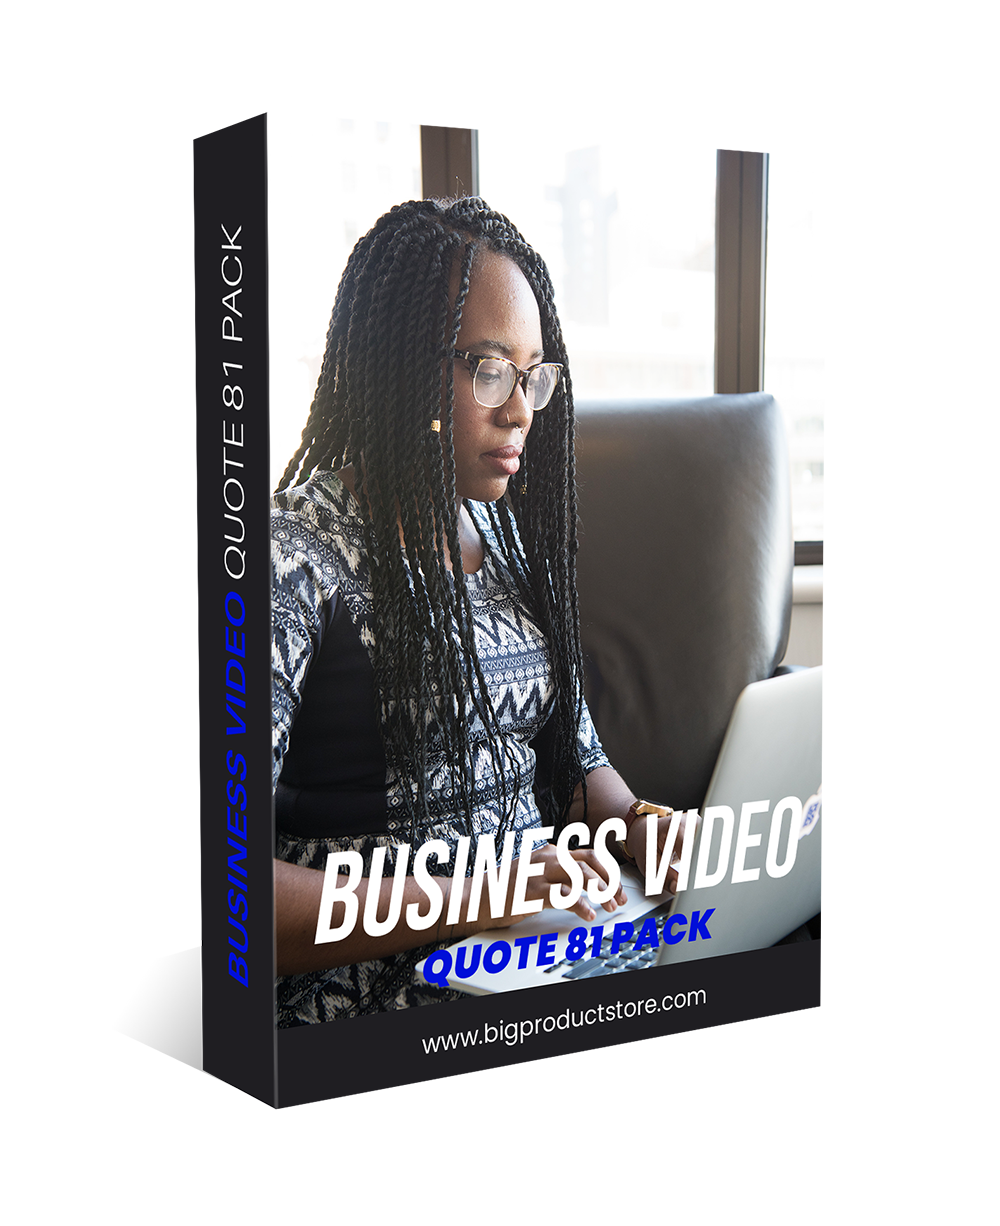 business-video-quote-81-pack-bigproductstore